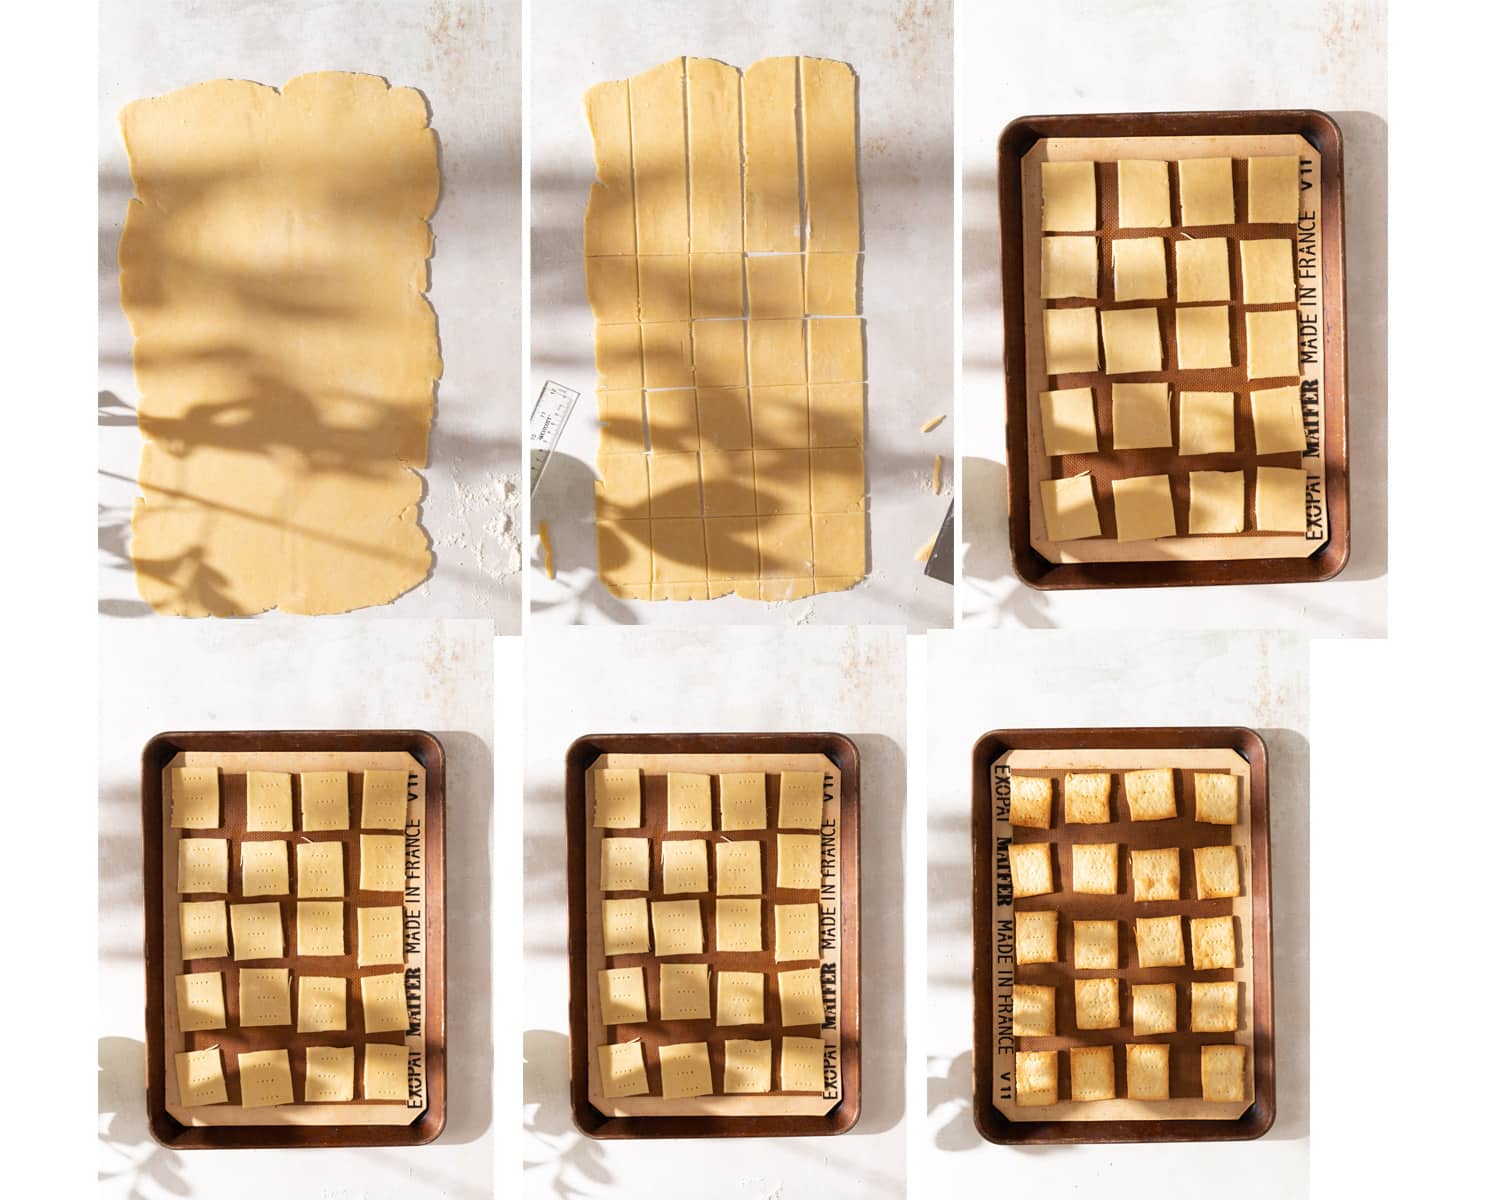 Process steps for baking the butter cookies.